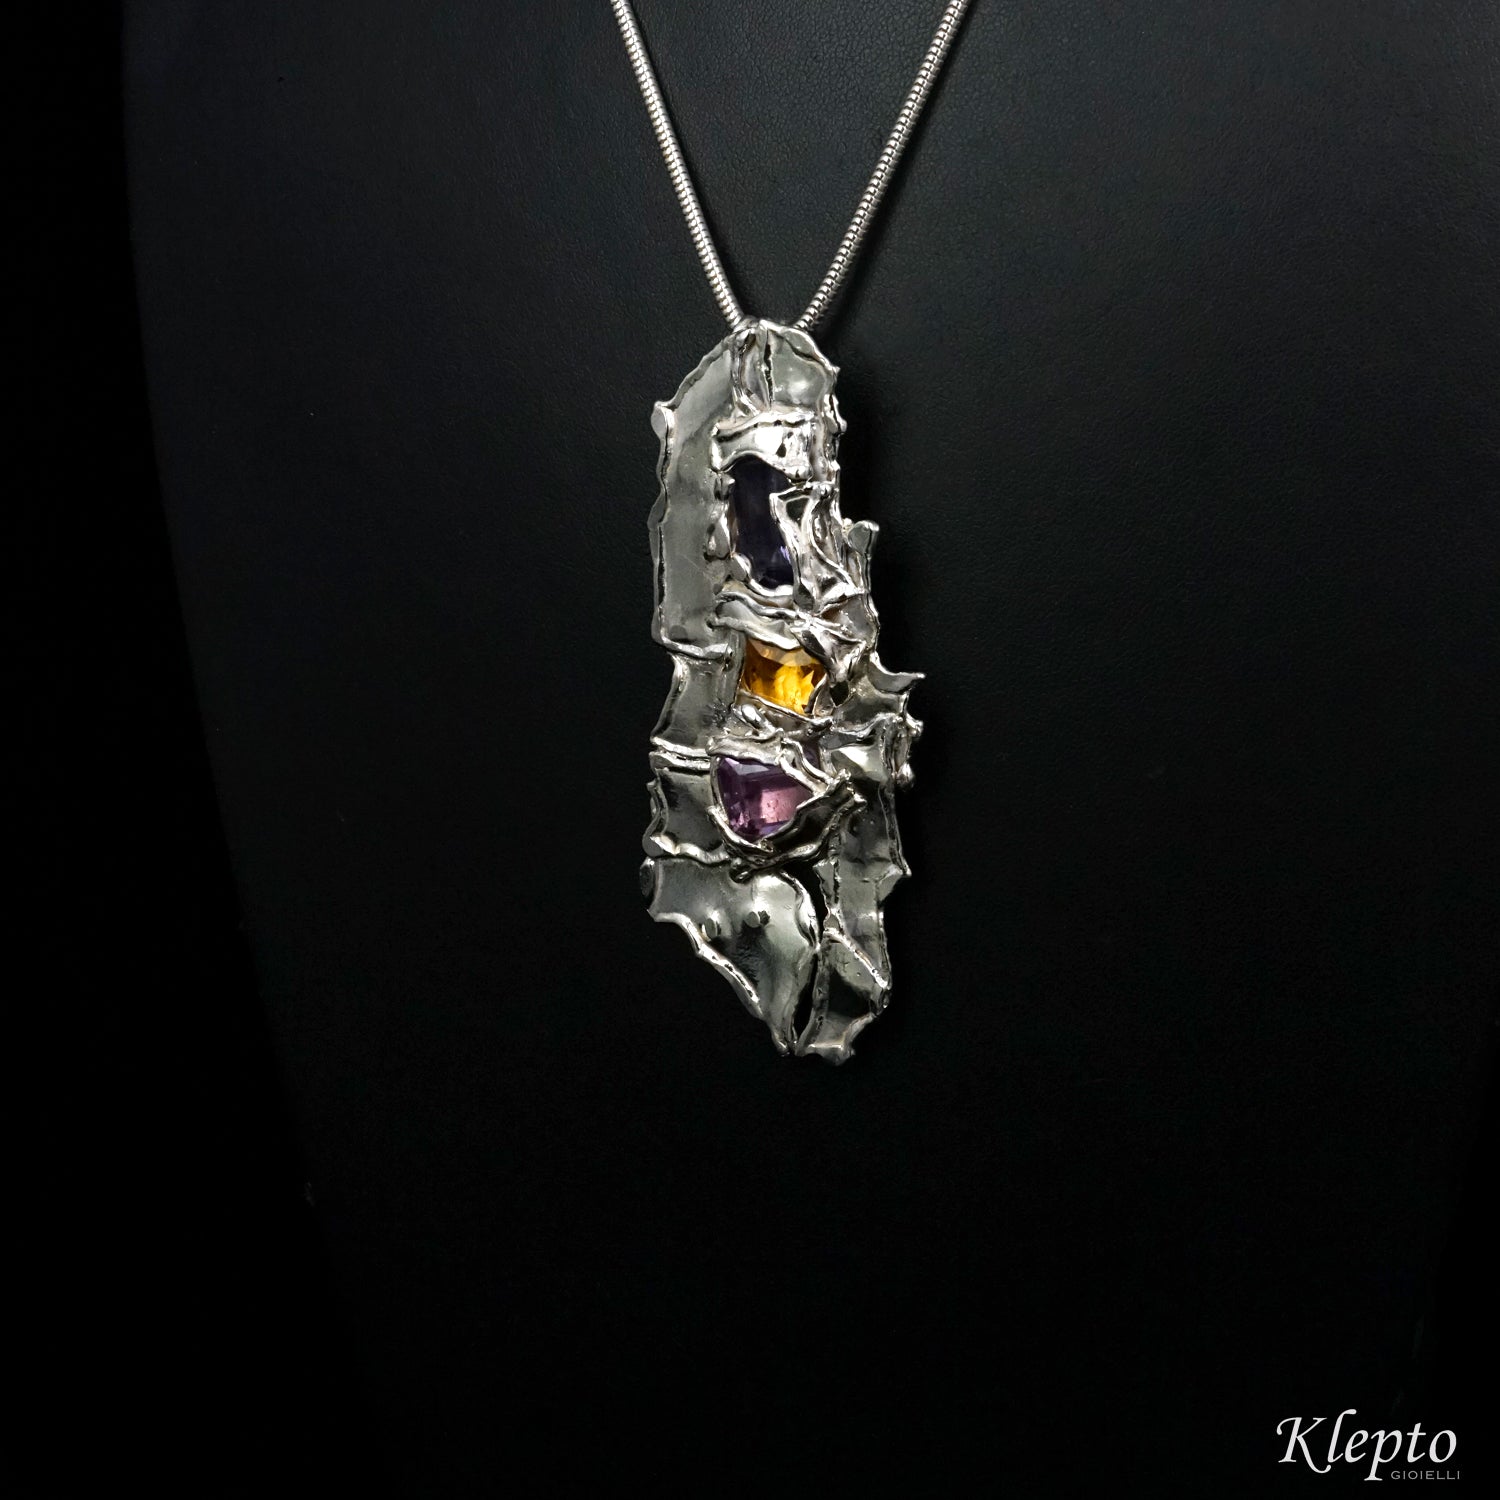 Pendant in Argento Silnova® with Iolite, Citrine and Amethyst